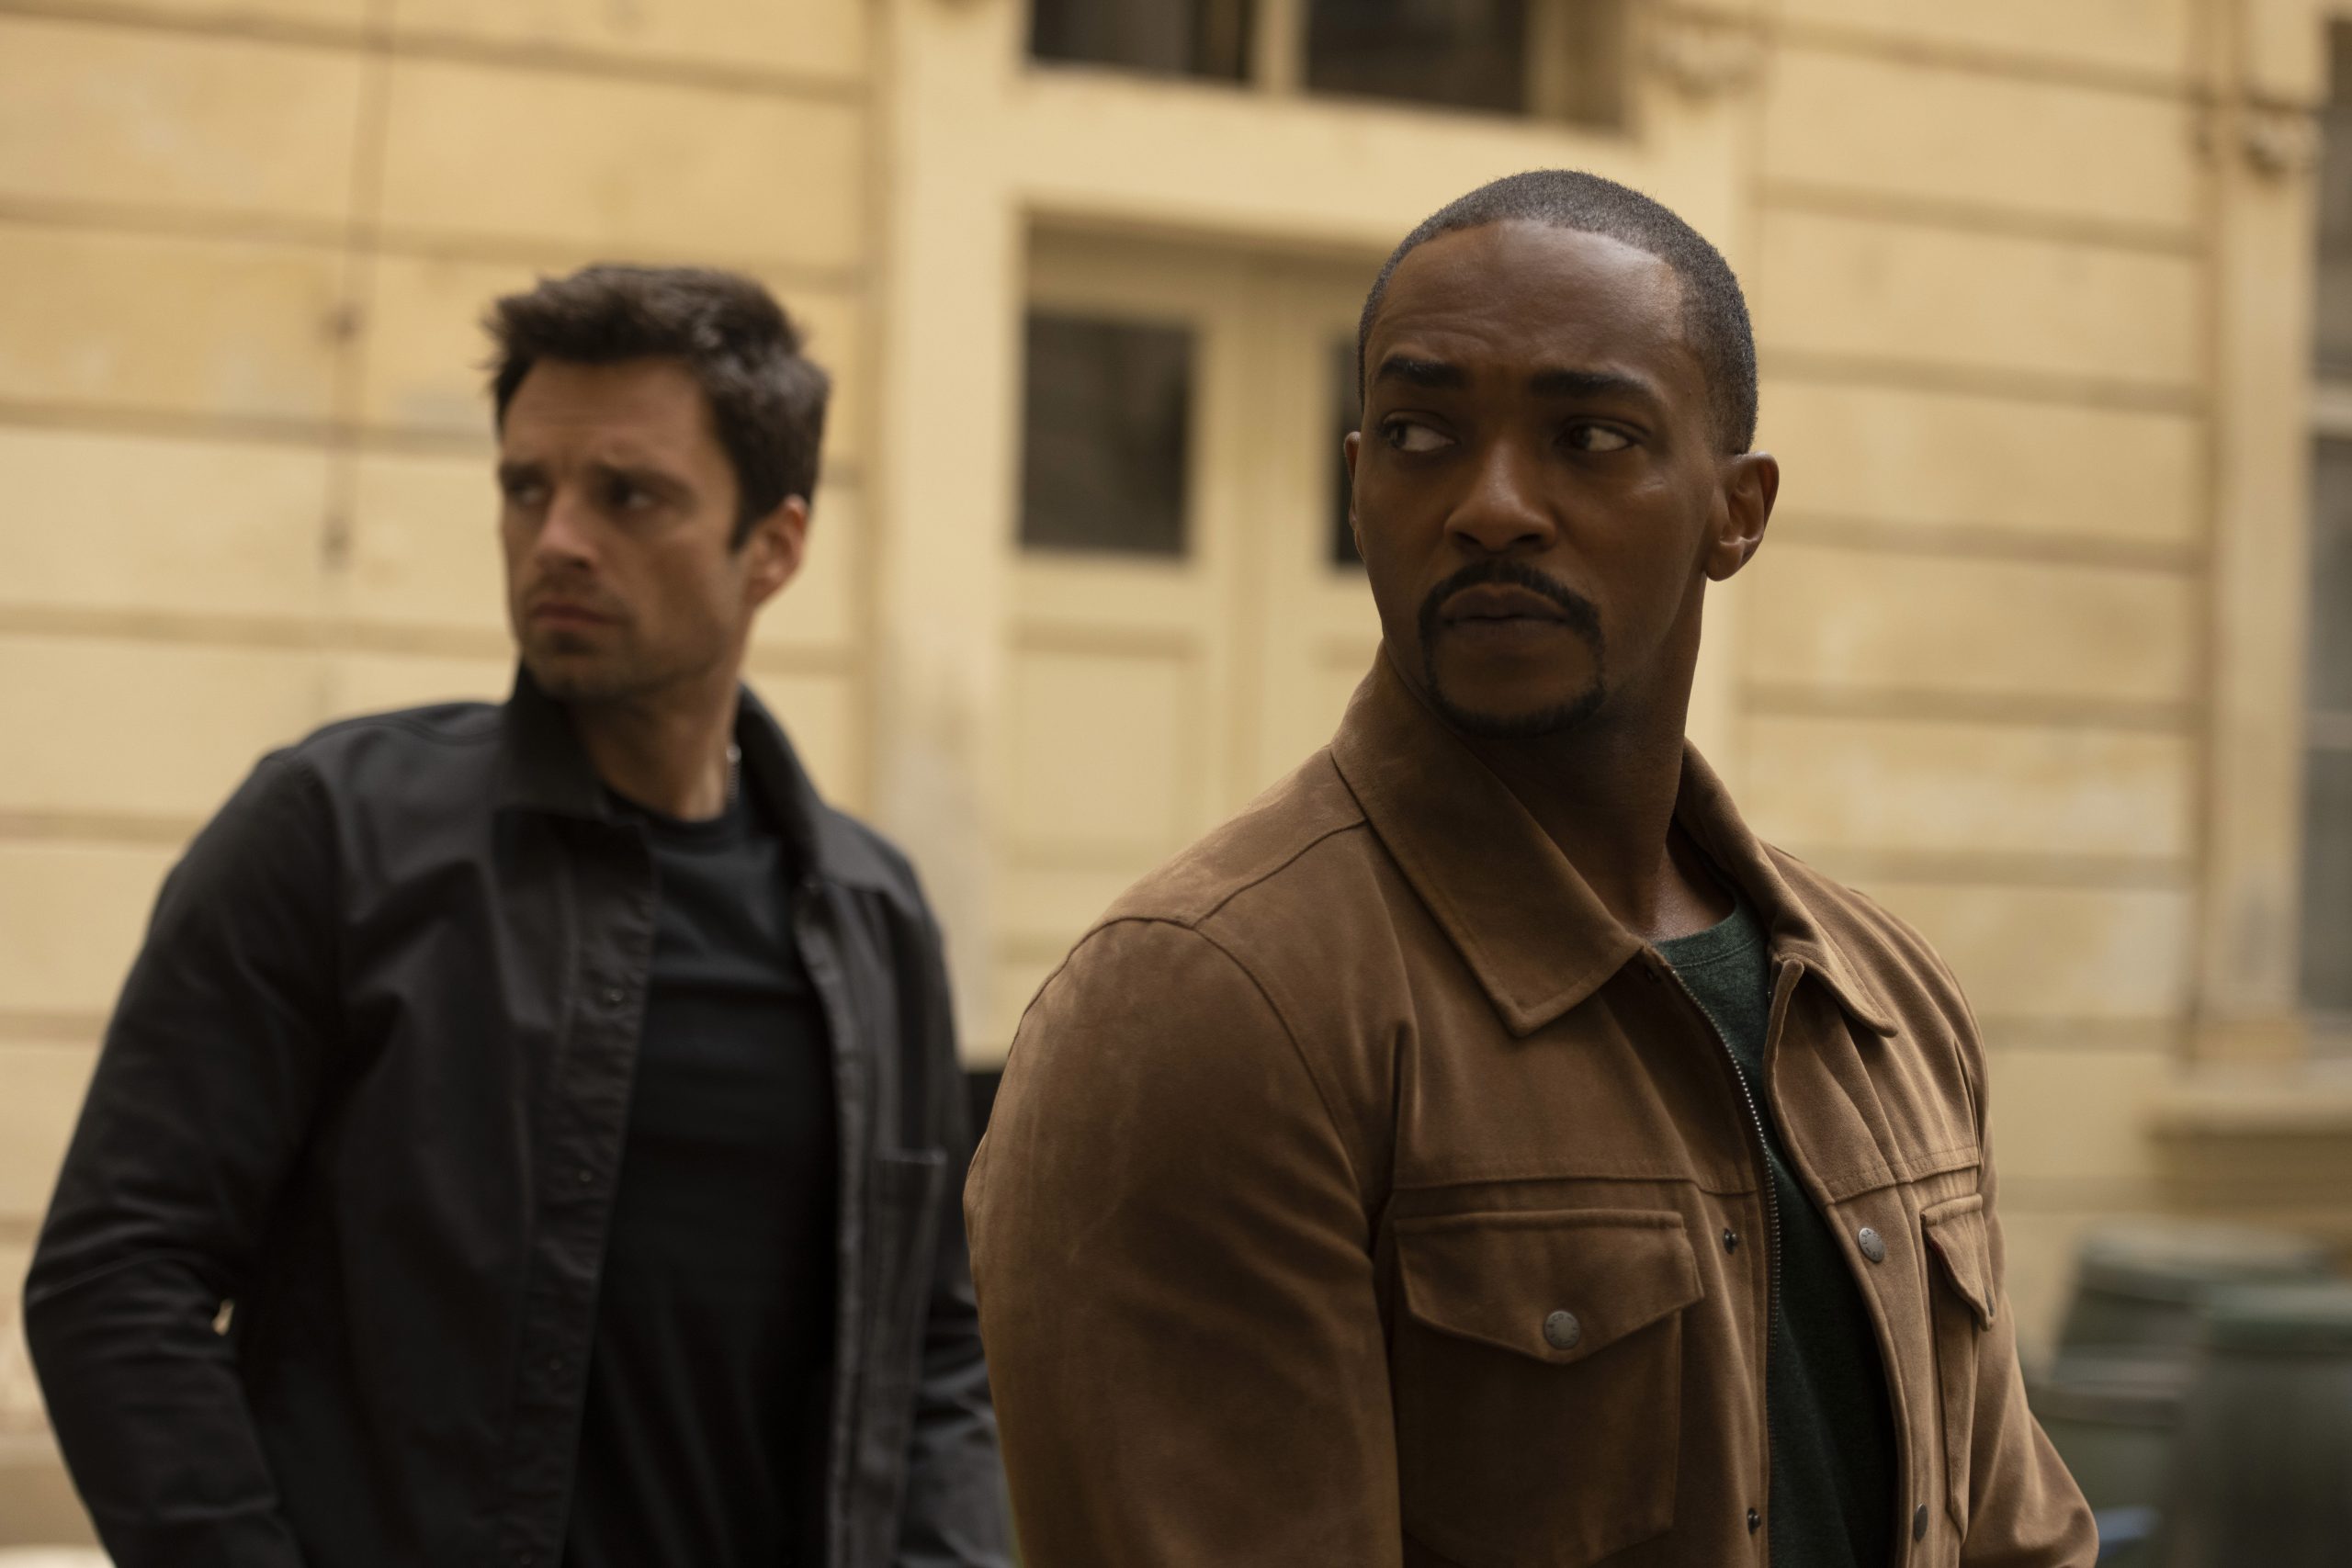 (L-R): Winter Soldier/Bucky Barnes (Sebastian Stan) and Falcon/Sam Wilson (Anthony Mackie) and in Marvel Studios' THE FALCON AND THE WINTER SOLDIER exclusively on Disney+. Photo by Julie Vrabelová. ©Marvel Studios 2021. All Rights Reserved.